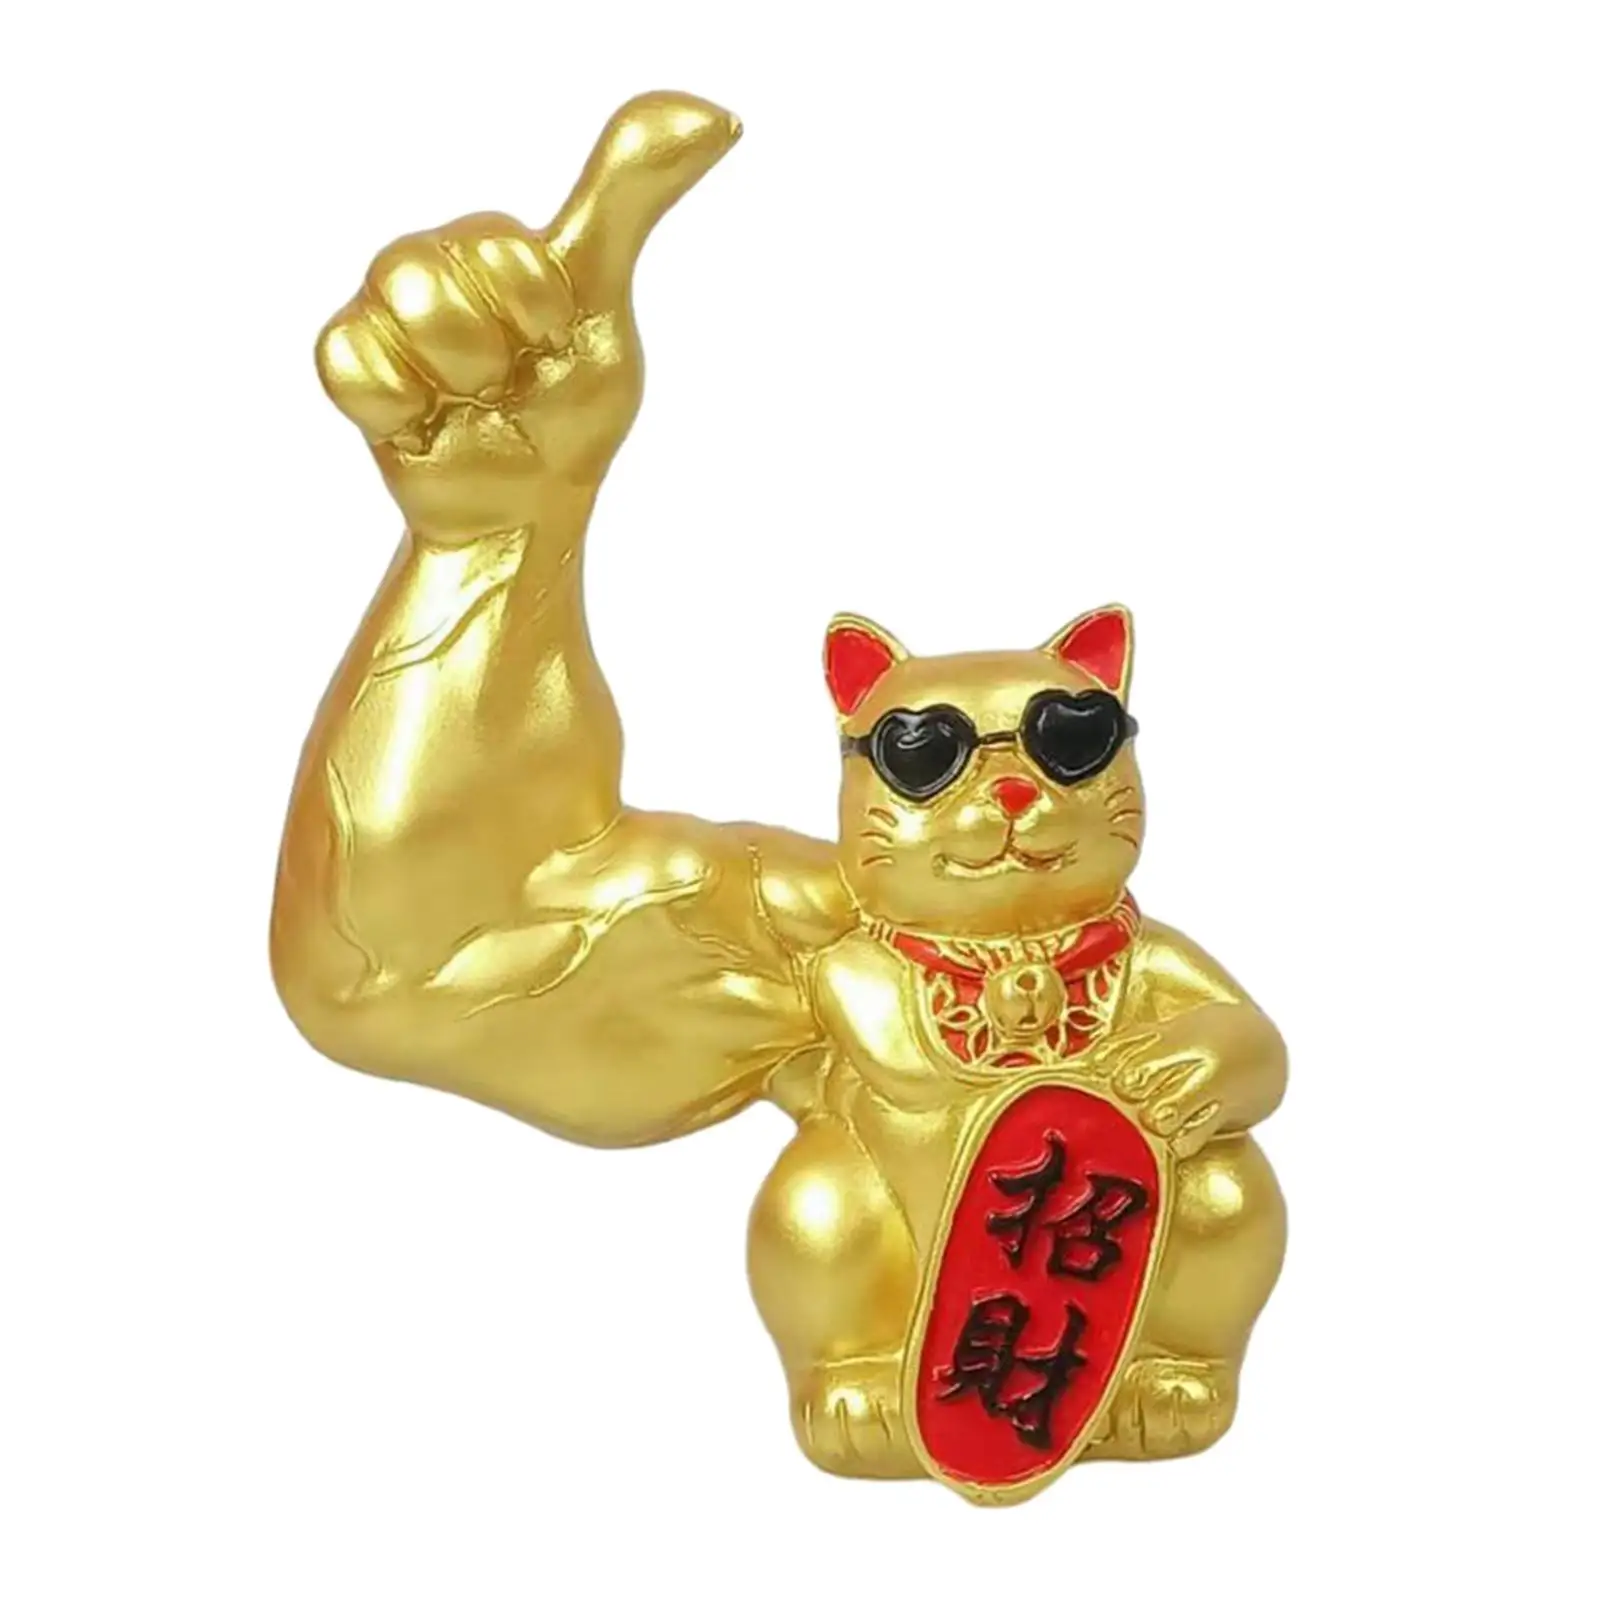 Resin Figurines Sculpture Collectible Ornament Lucky Cat Statues for Tabletop Studio